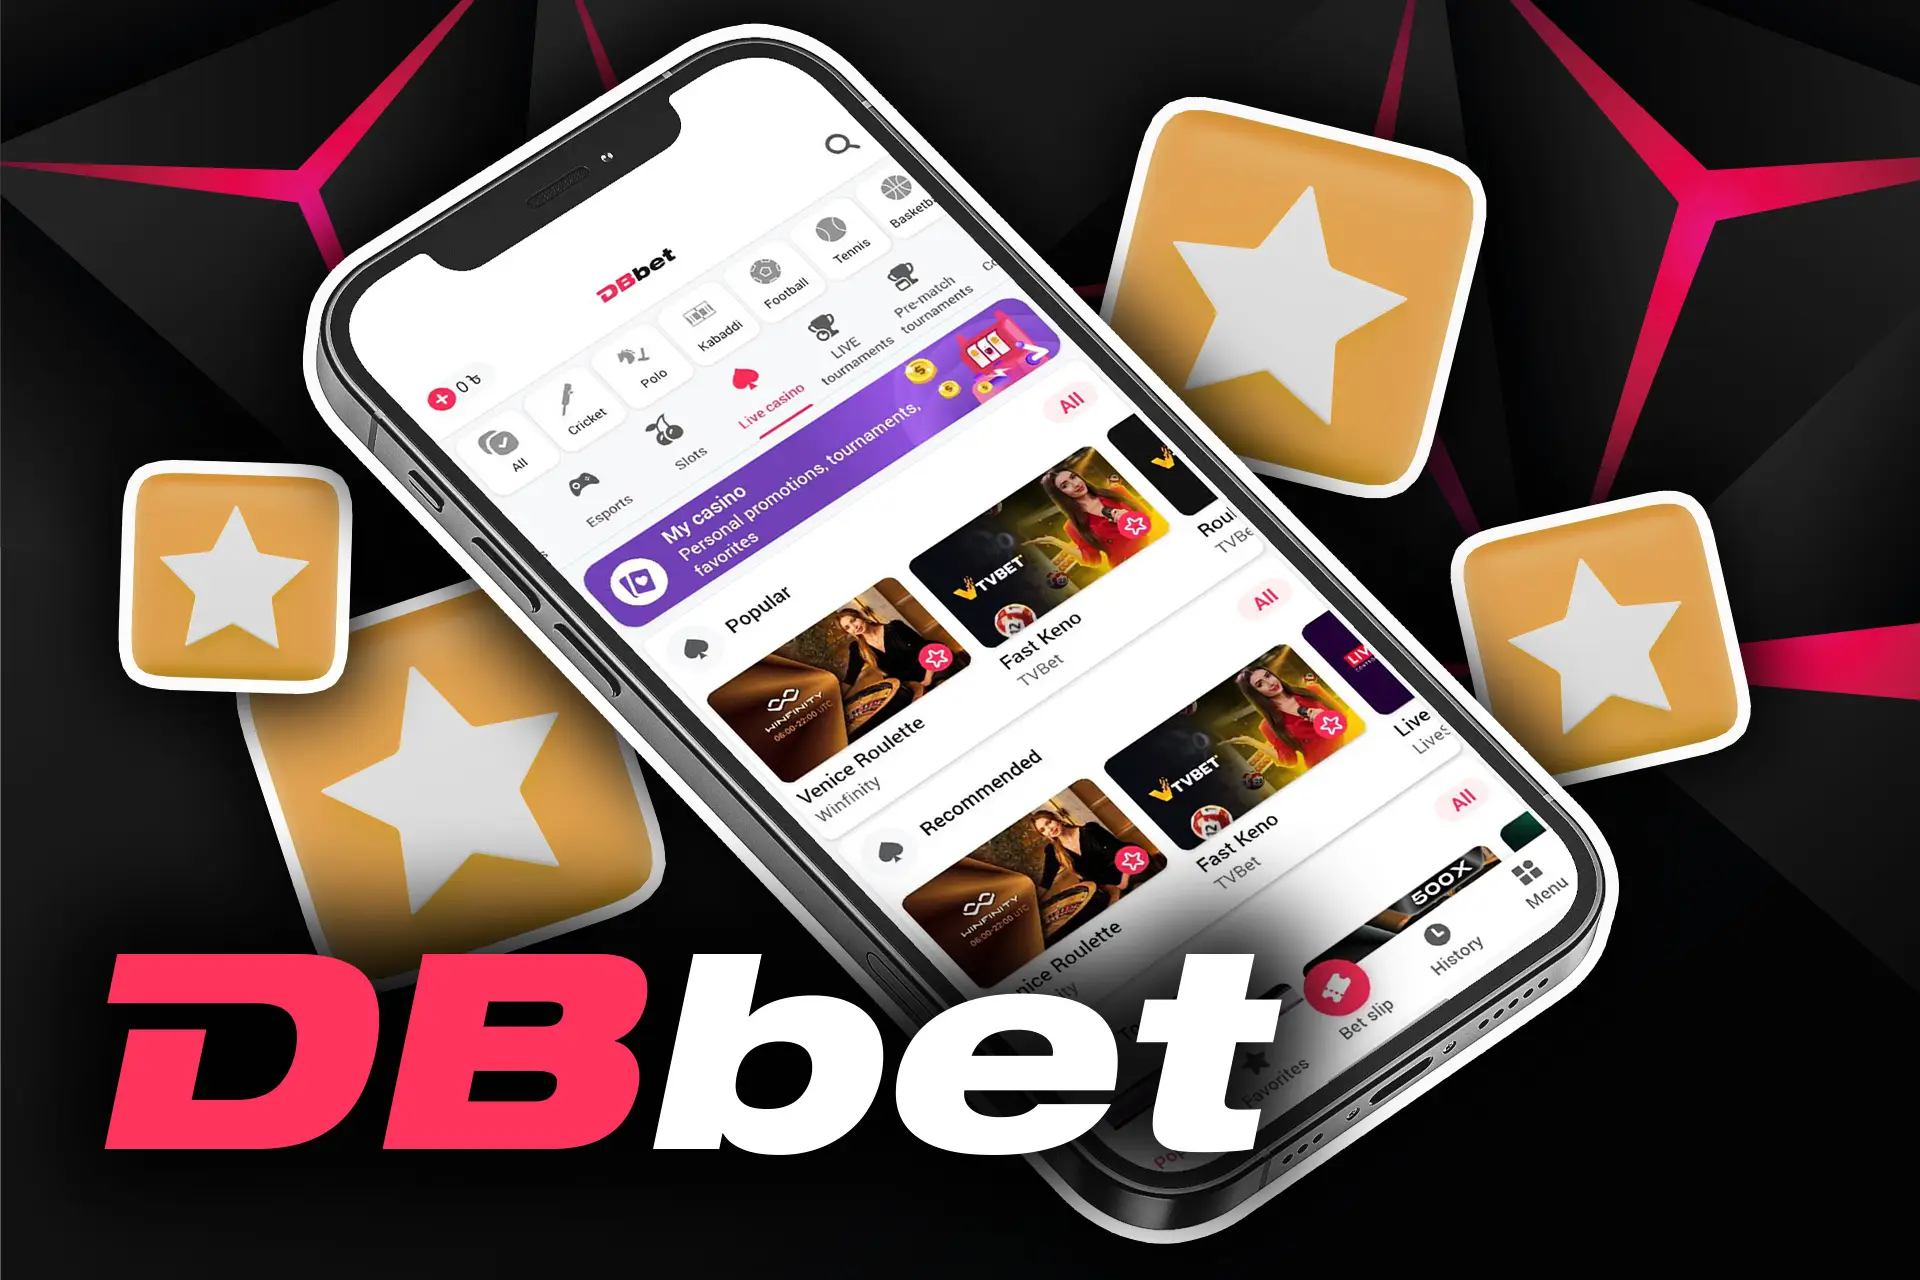 In the DBbet app you have many games and different sports available for betting.